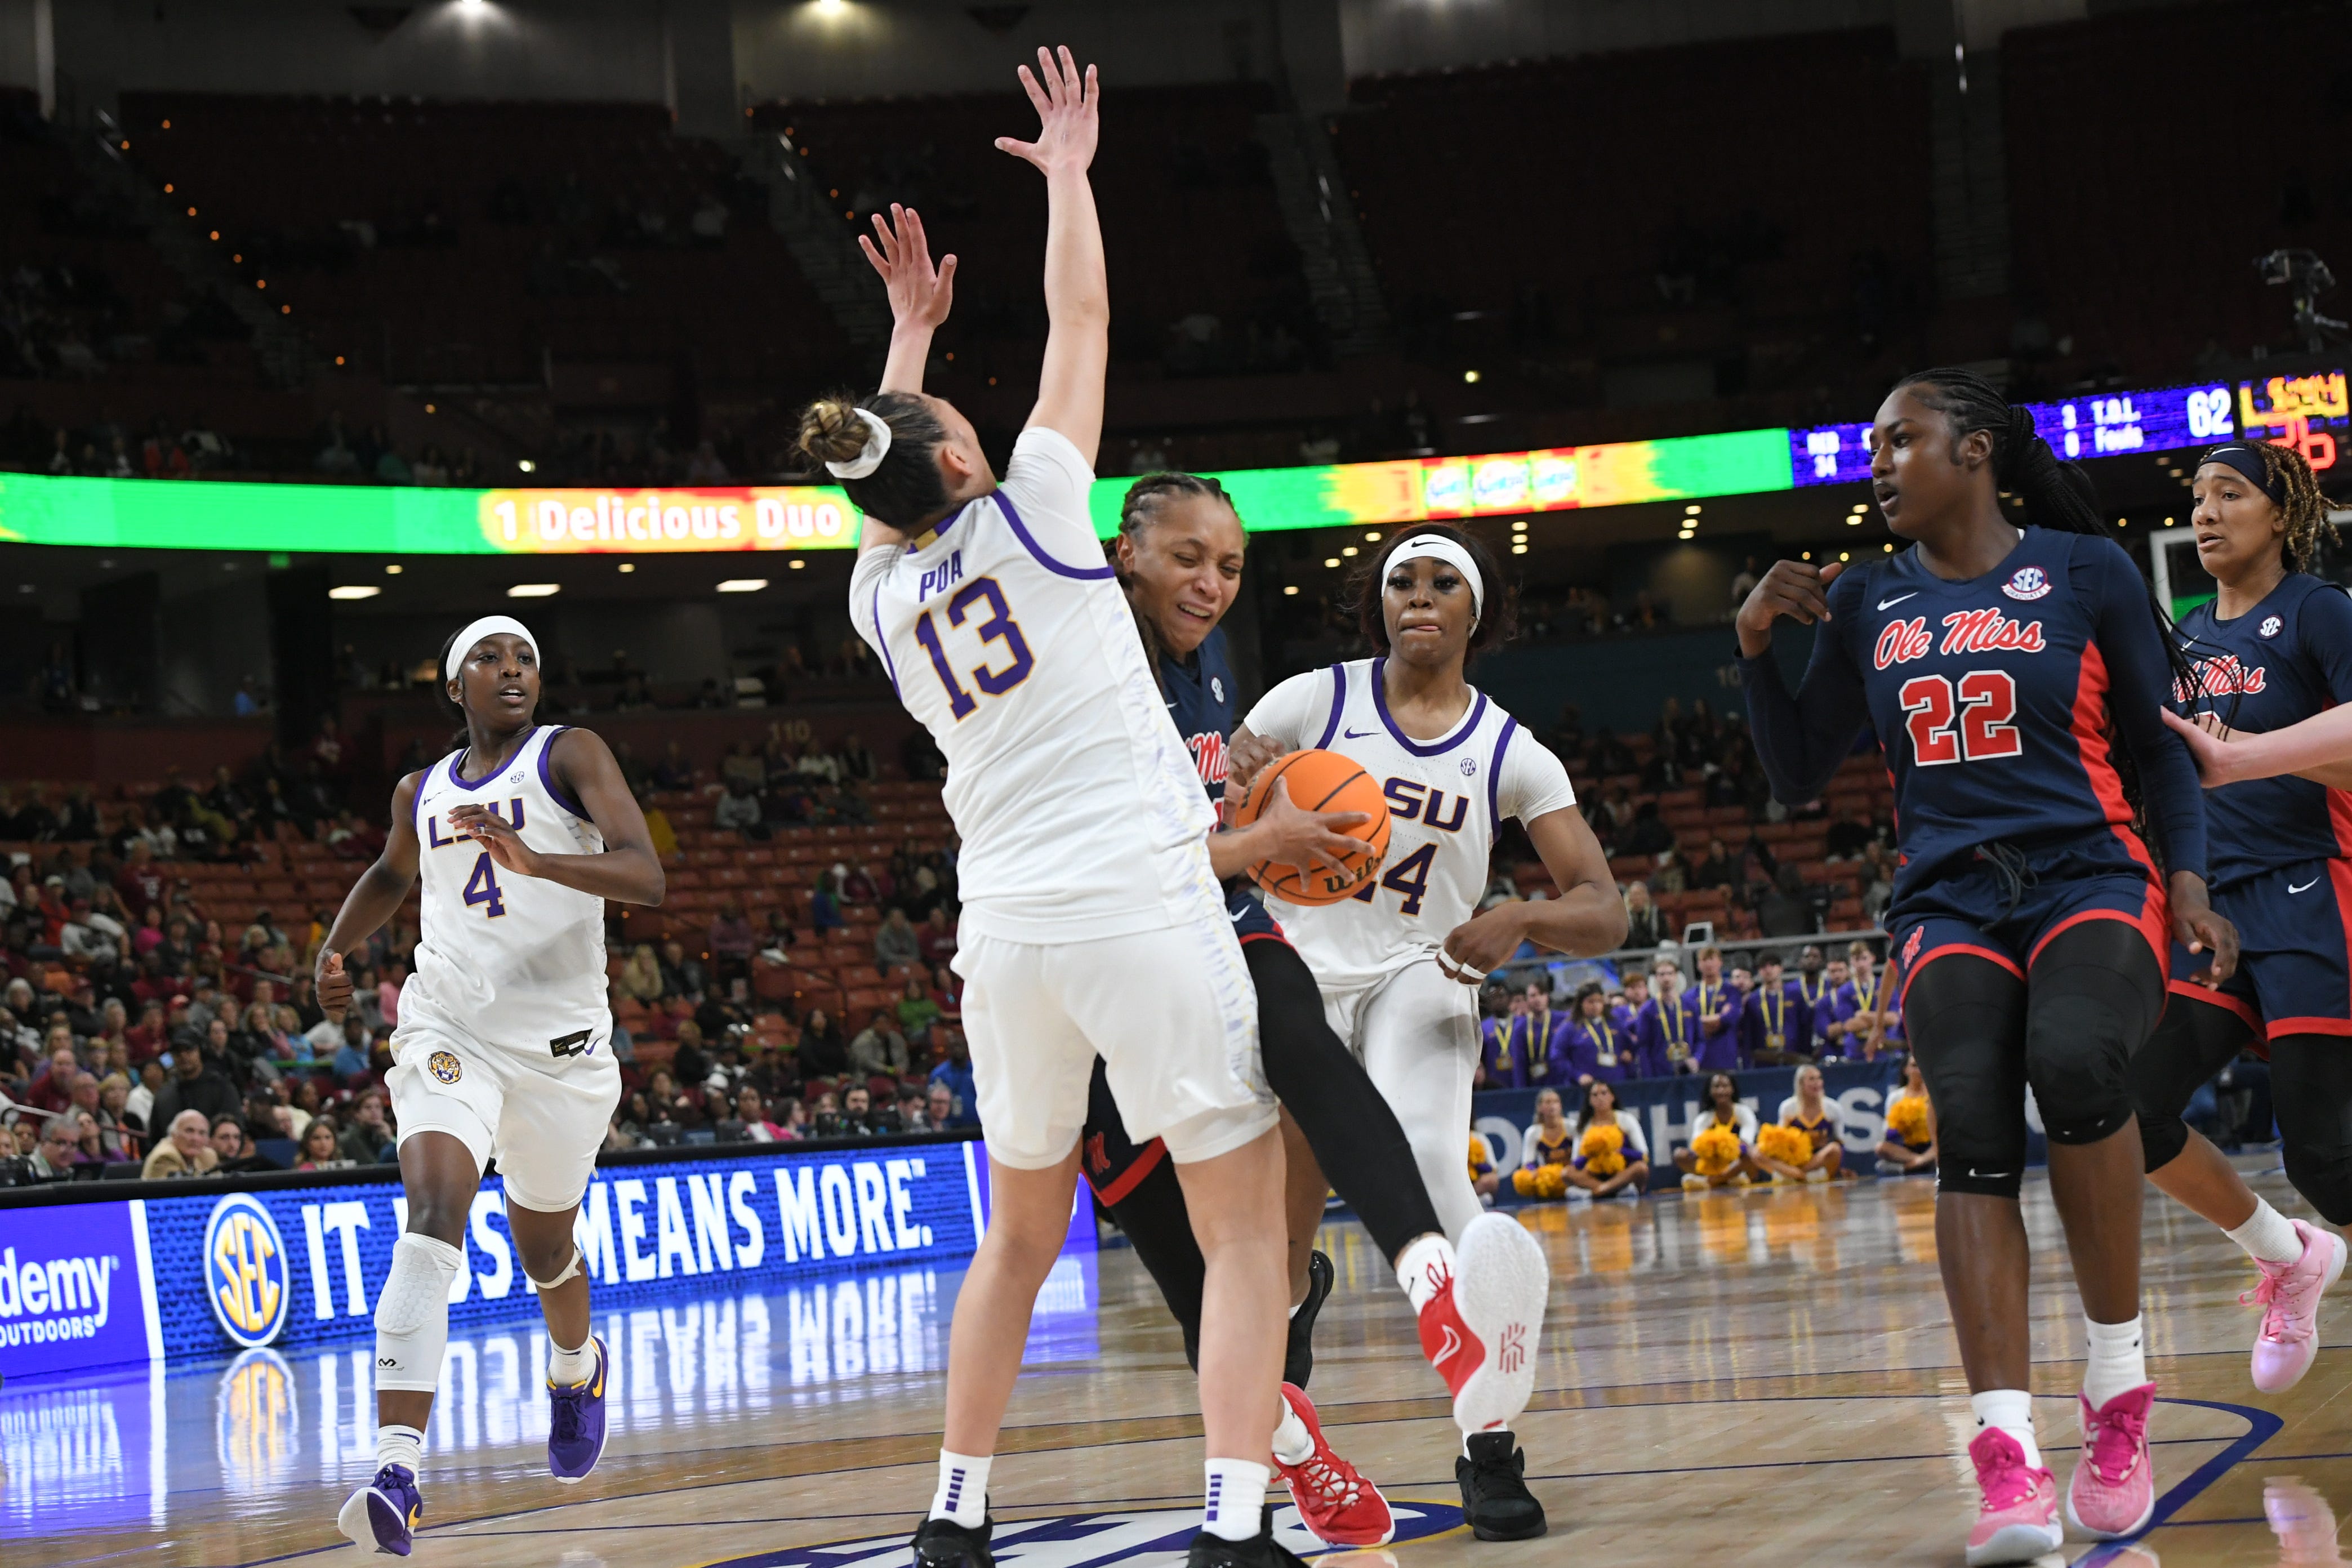 Ole Miss Madison Scott (24) shoots the ball near Louisiana State University guard Last-Tear Poa (13) falling backwards, during the fourth quarter of the SEC Women's Basketball Tournament game at the Bon Secours Wellness Arena in Greenville, S.C. Saturday, March 9, 2024.